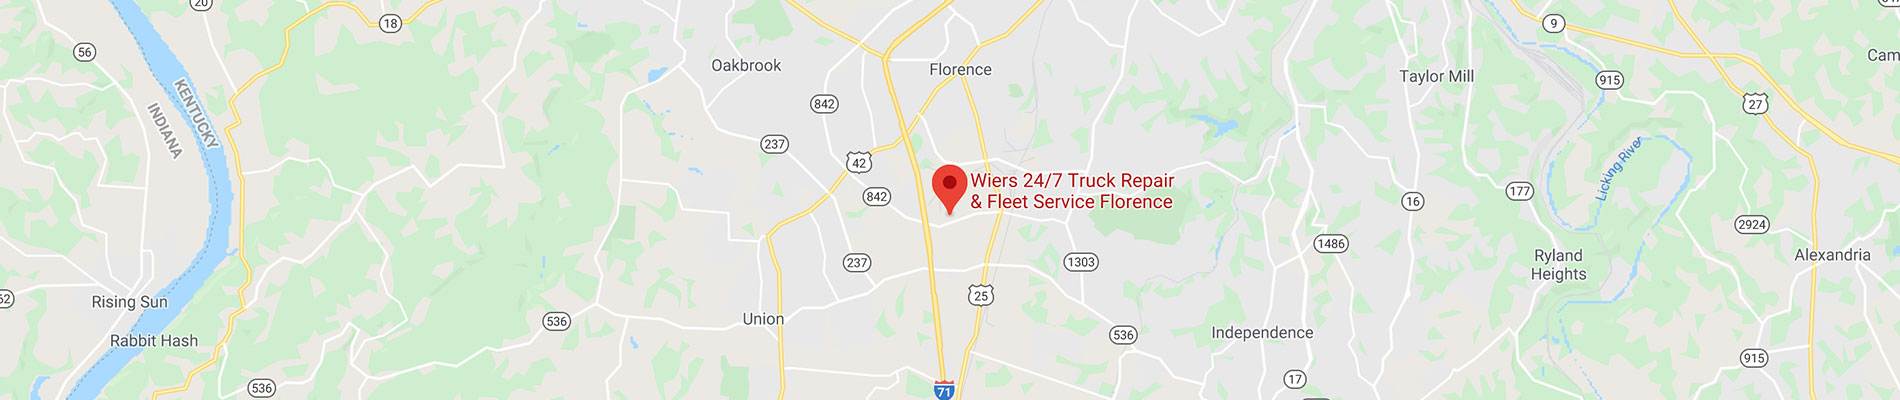 location map for wiers fleet service and truck repair florence, ky